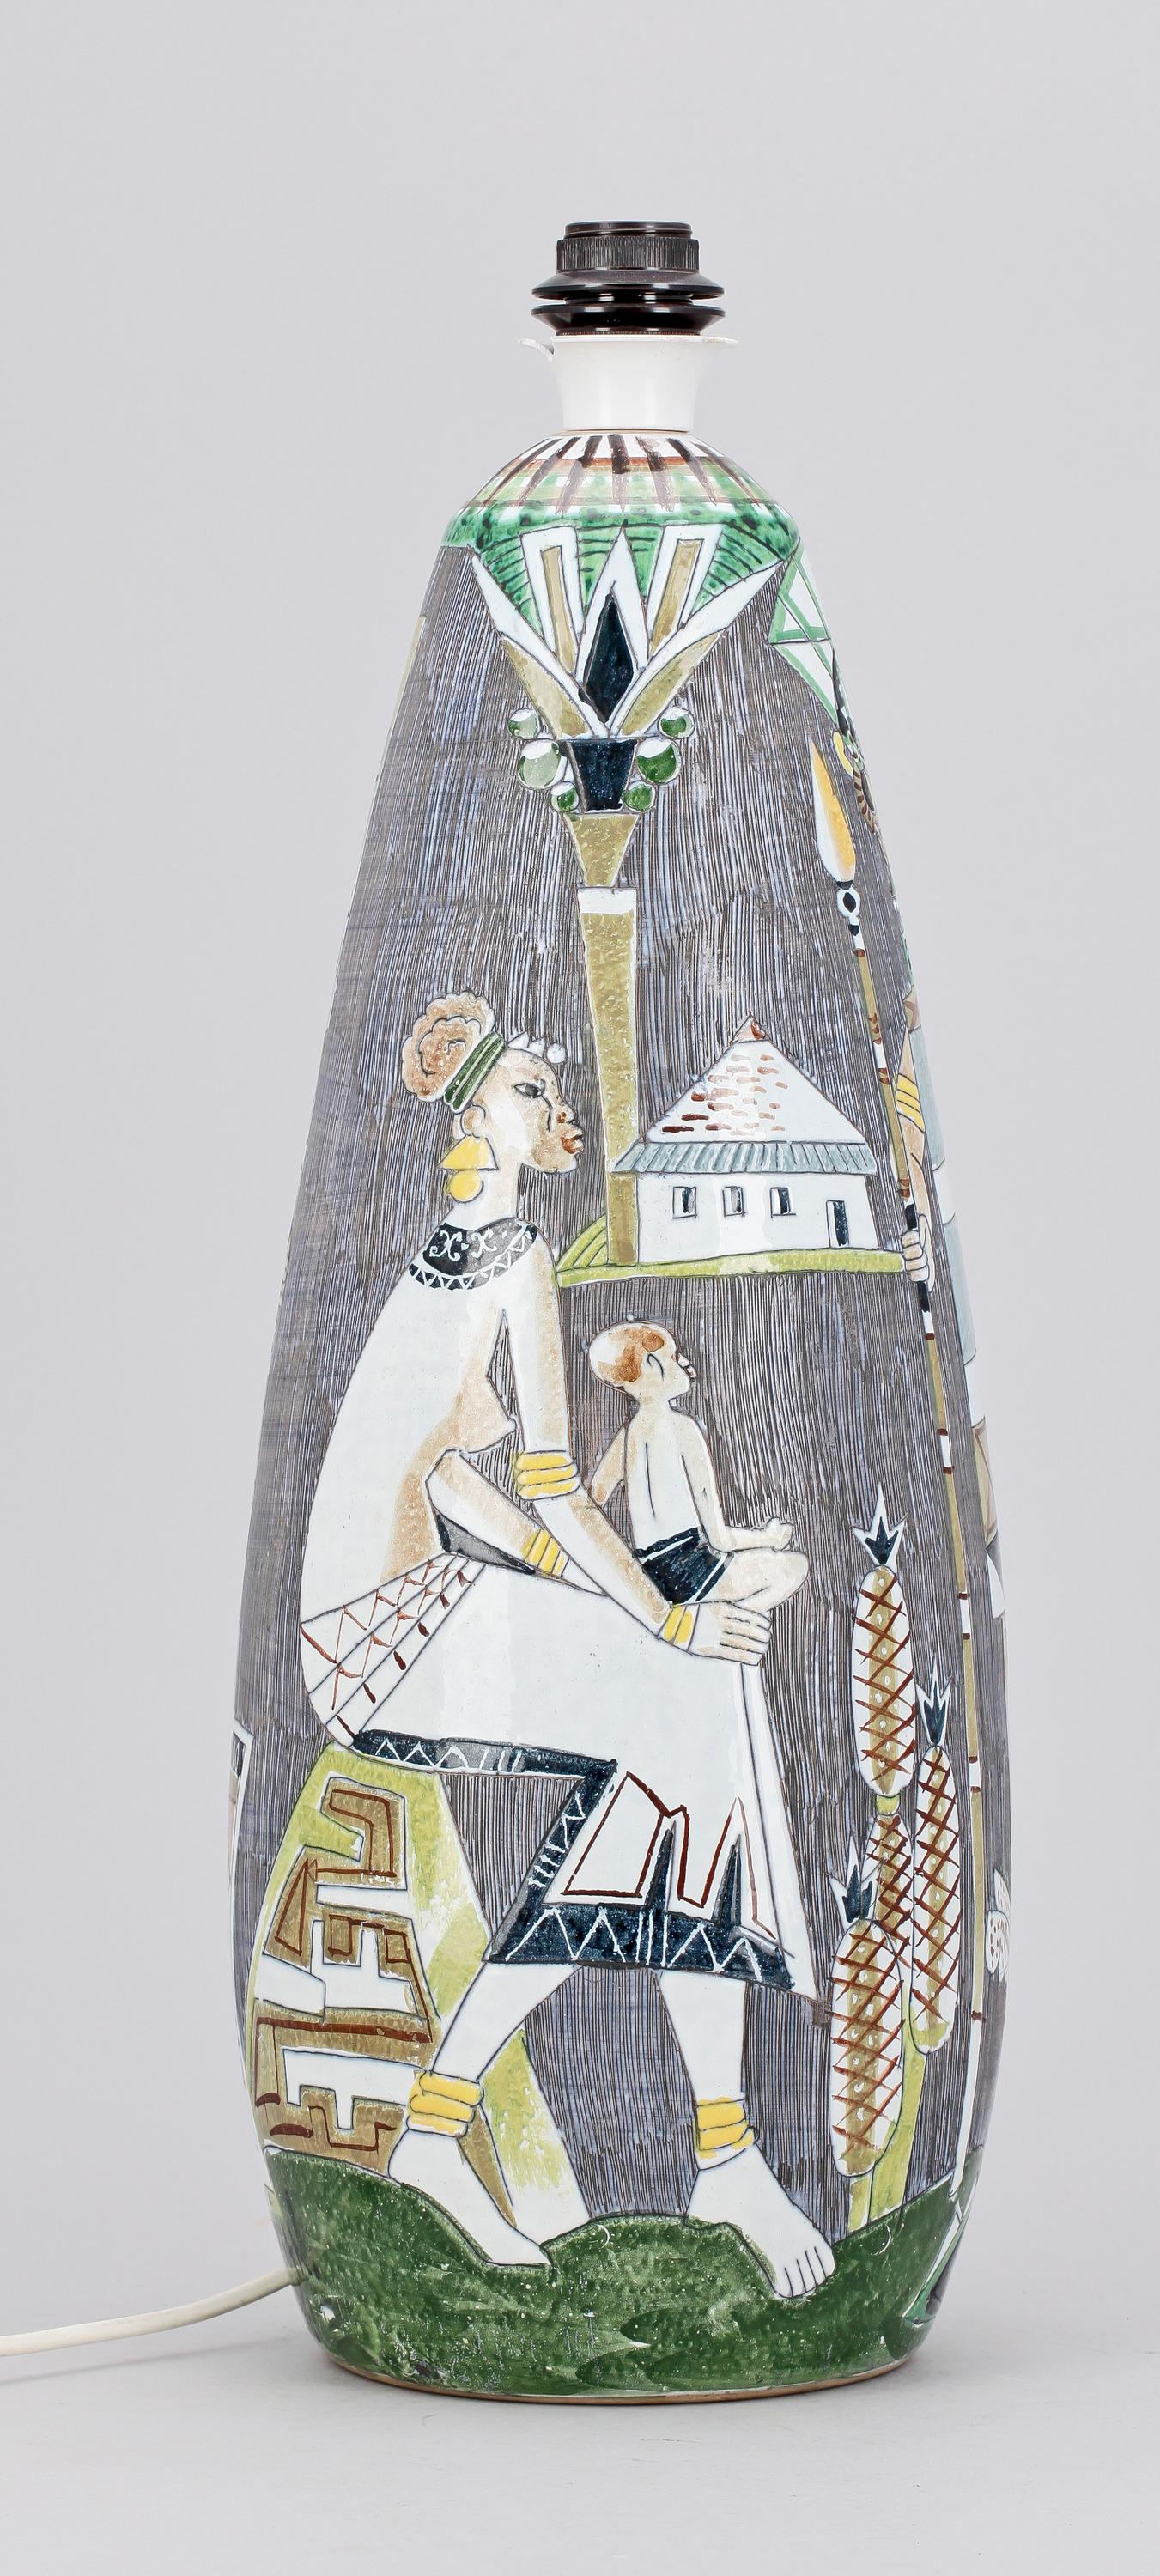 Ceramic floor lamp by Marian Zawadsky for Atelier Tilgmans made in 1961. Polychrome decorated with figurative scene depicting Hispanic indigenous people. Signed and dated
Good condition